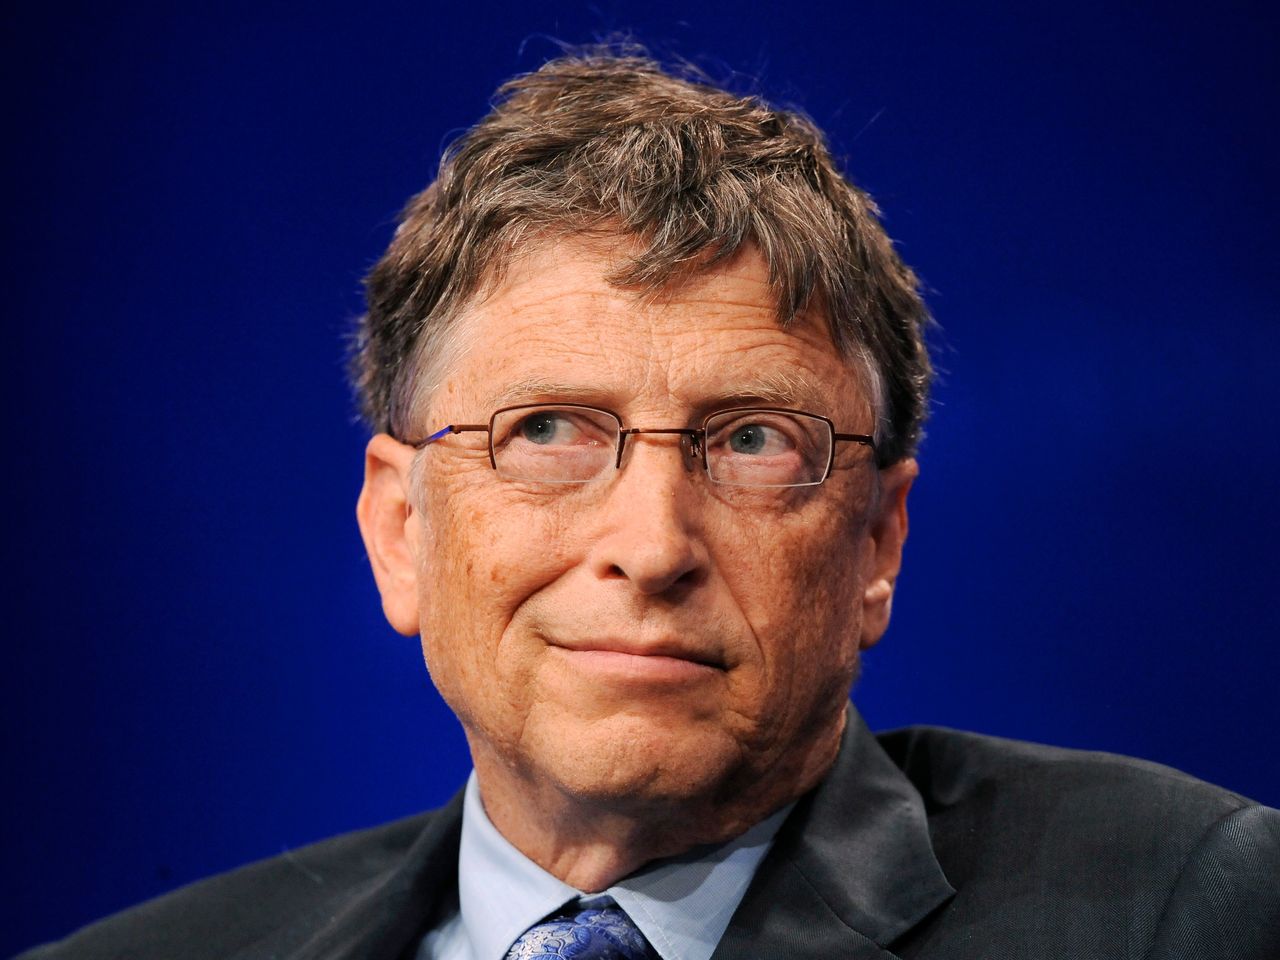 bill-gates-says-its-too-early-for-basic-income-but-over-time-countries-will-be-rich-enough